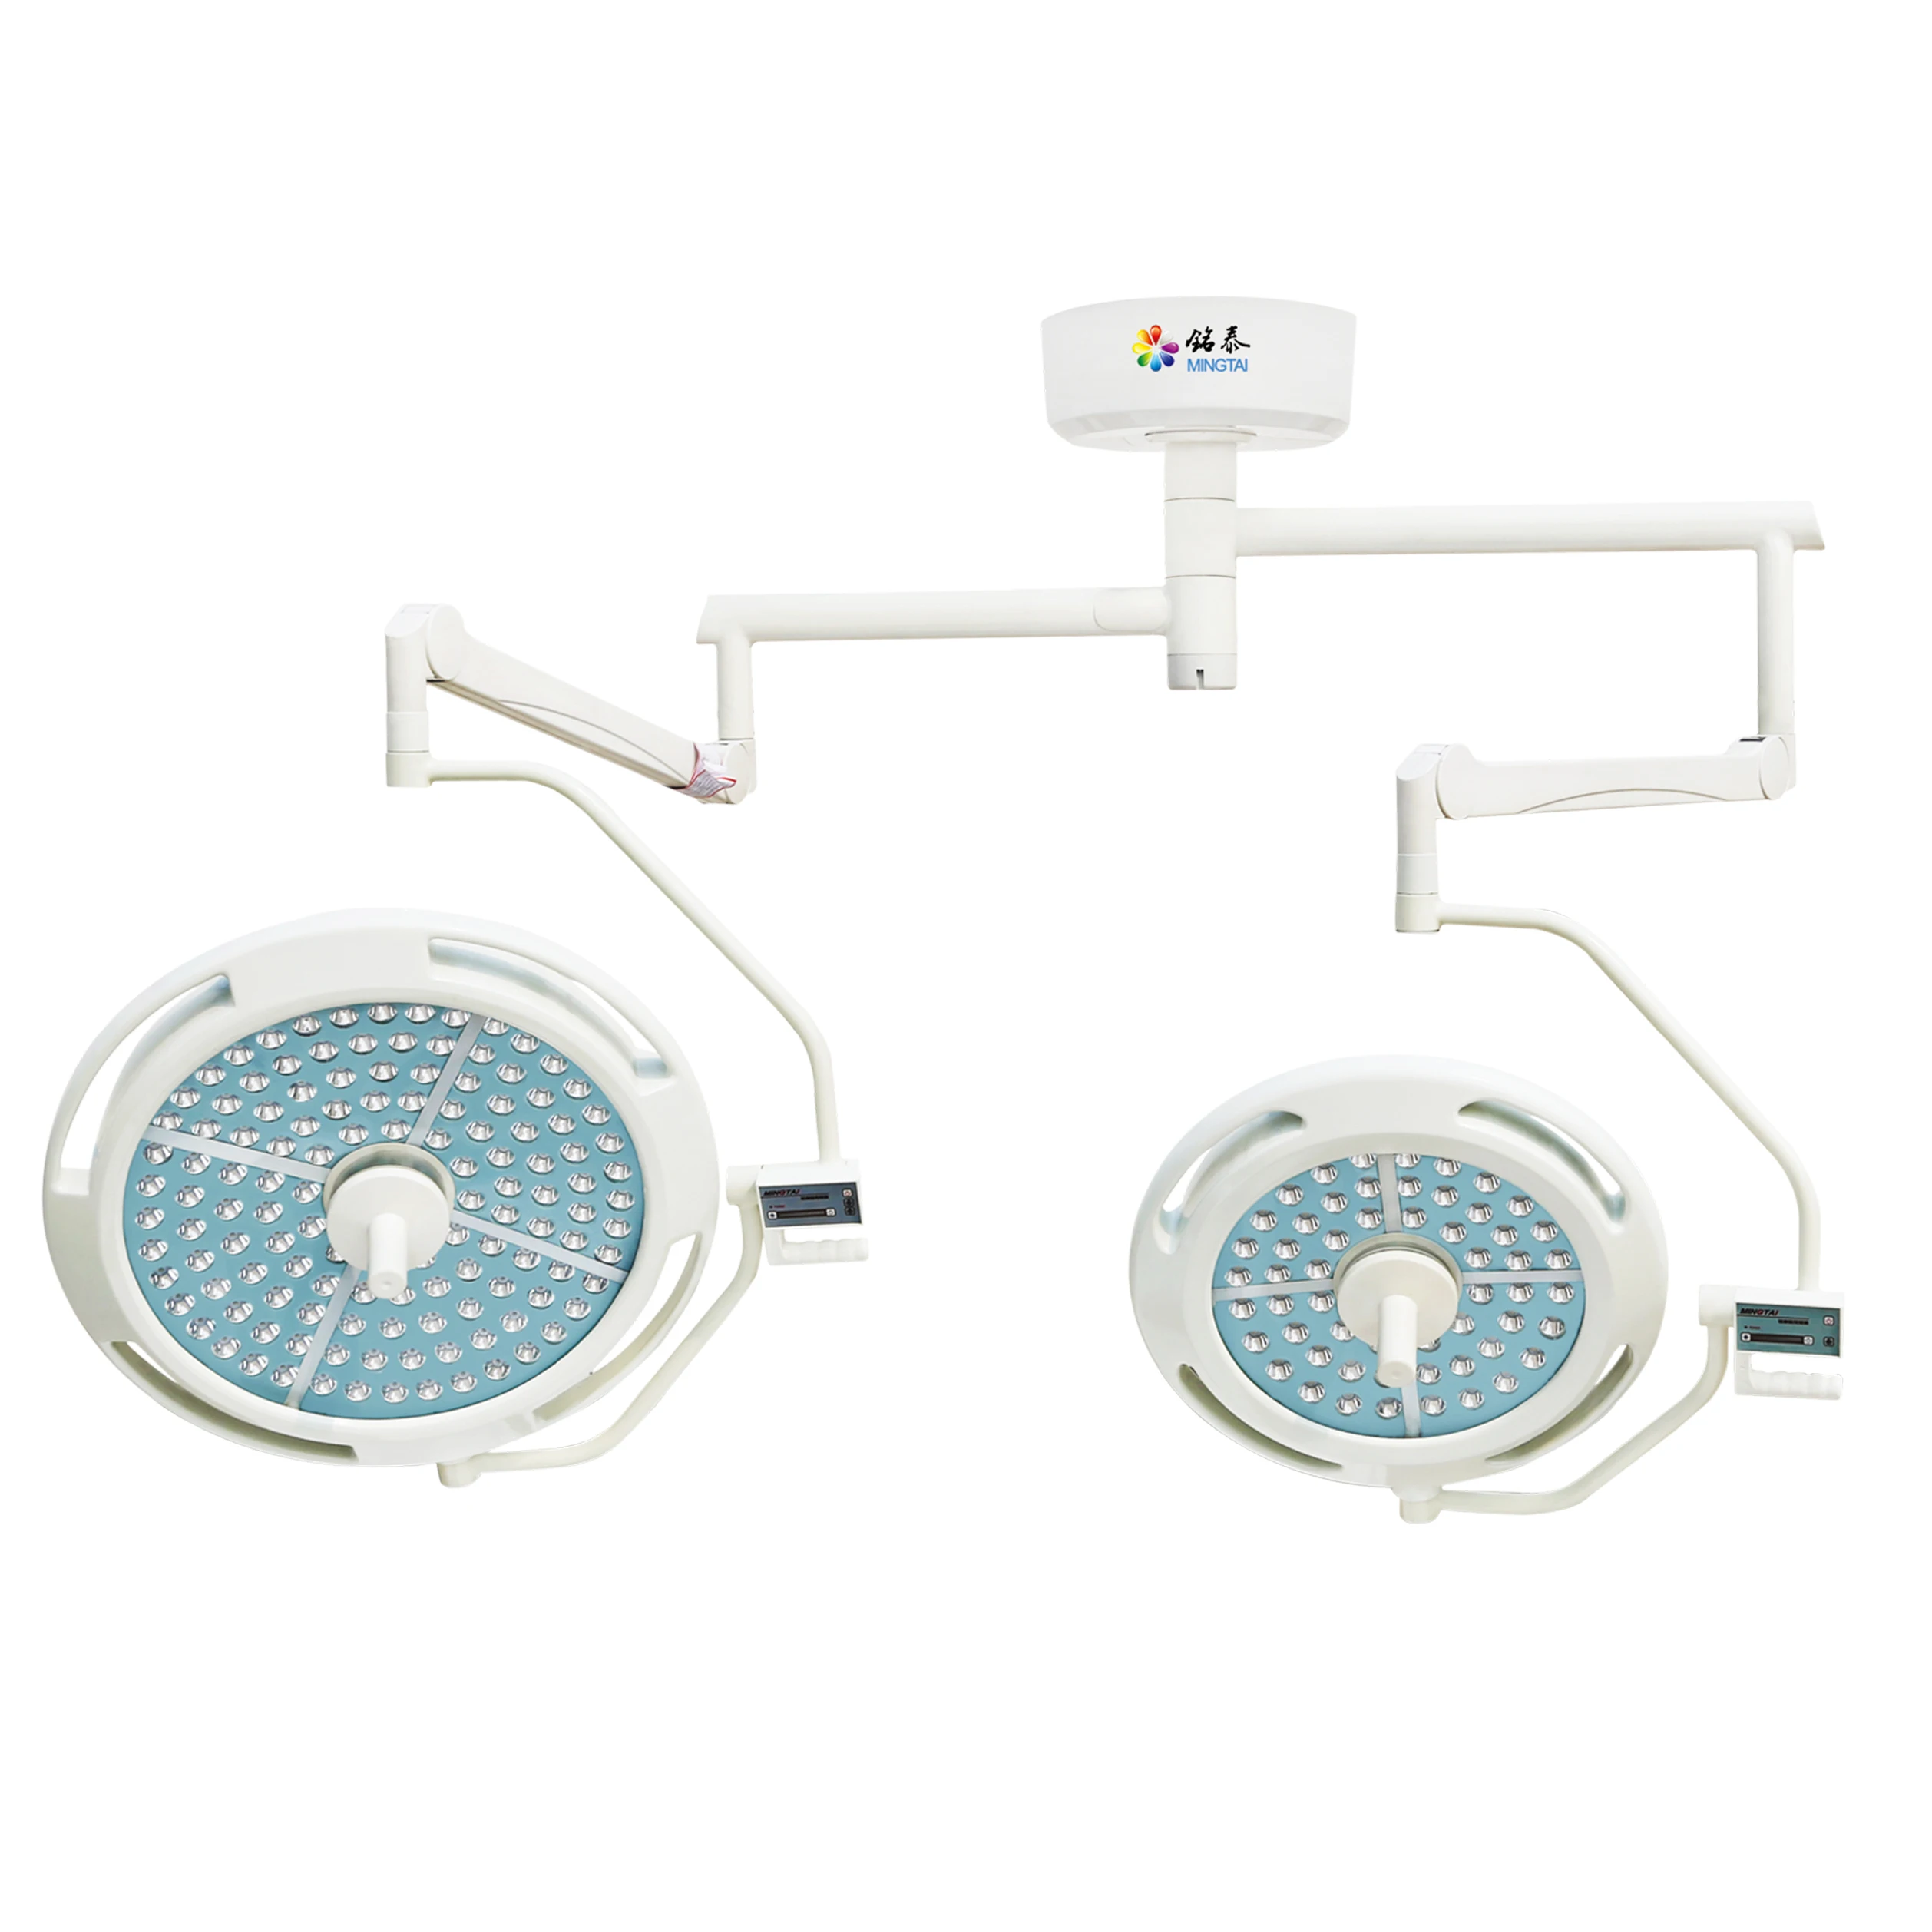 Double dome LED hospital ceiling lamp / operating light / shadowless lamp